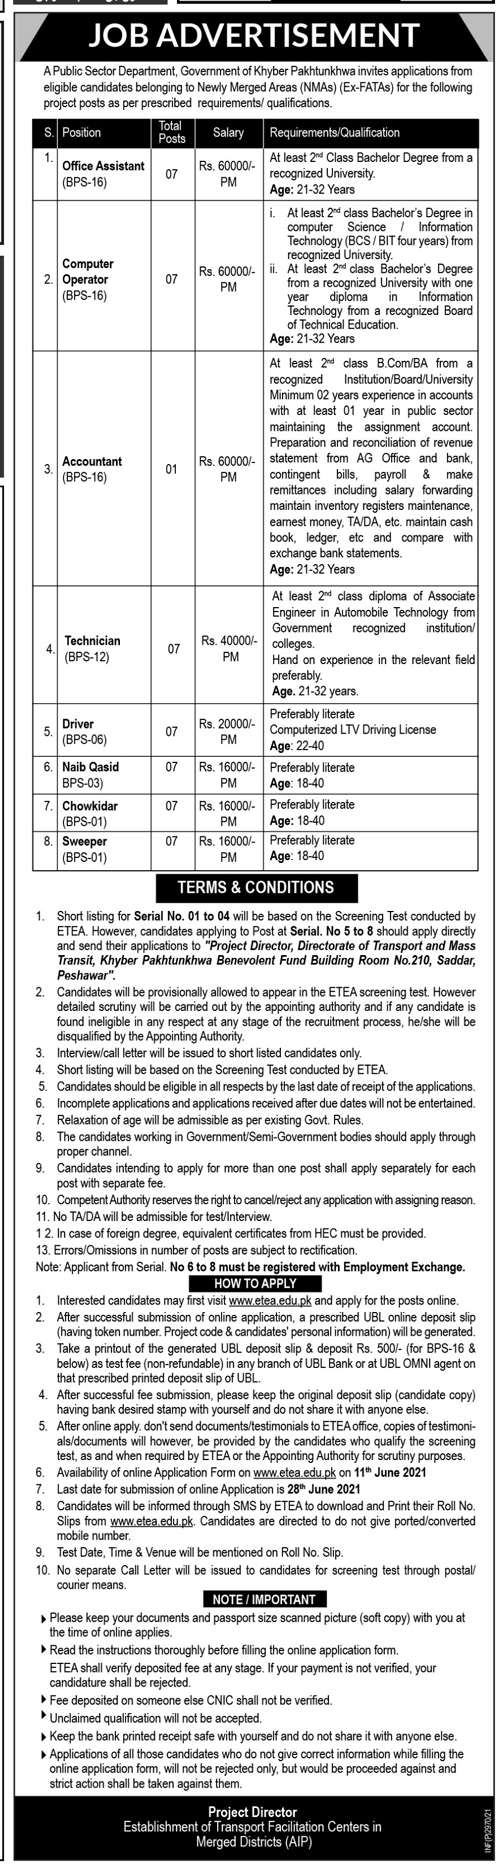 Public Sector Department Government of KPK JOBS